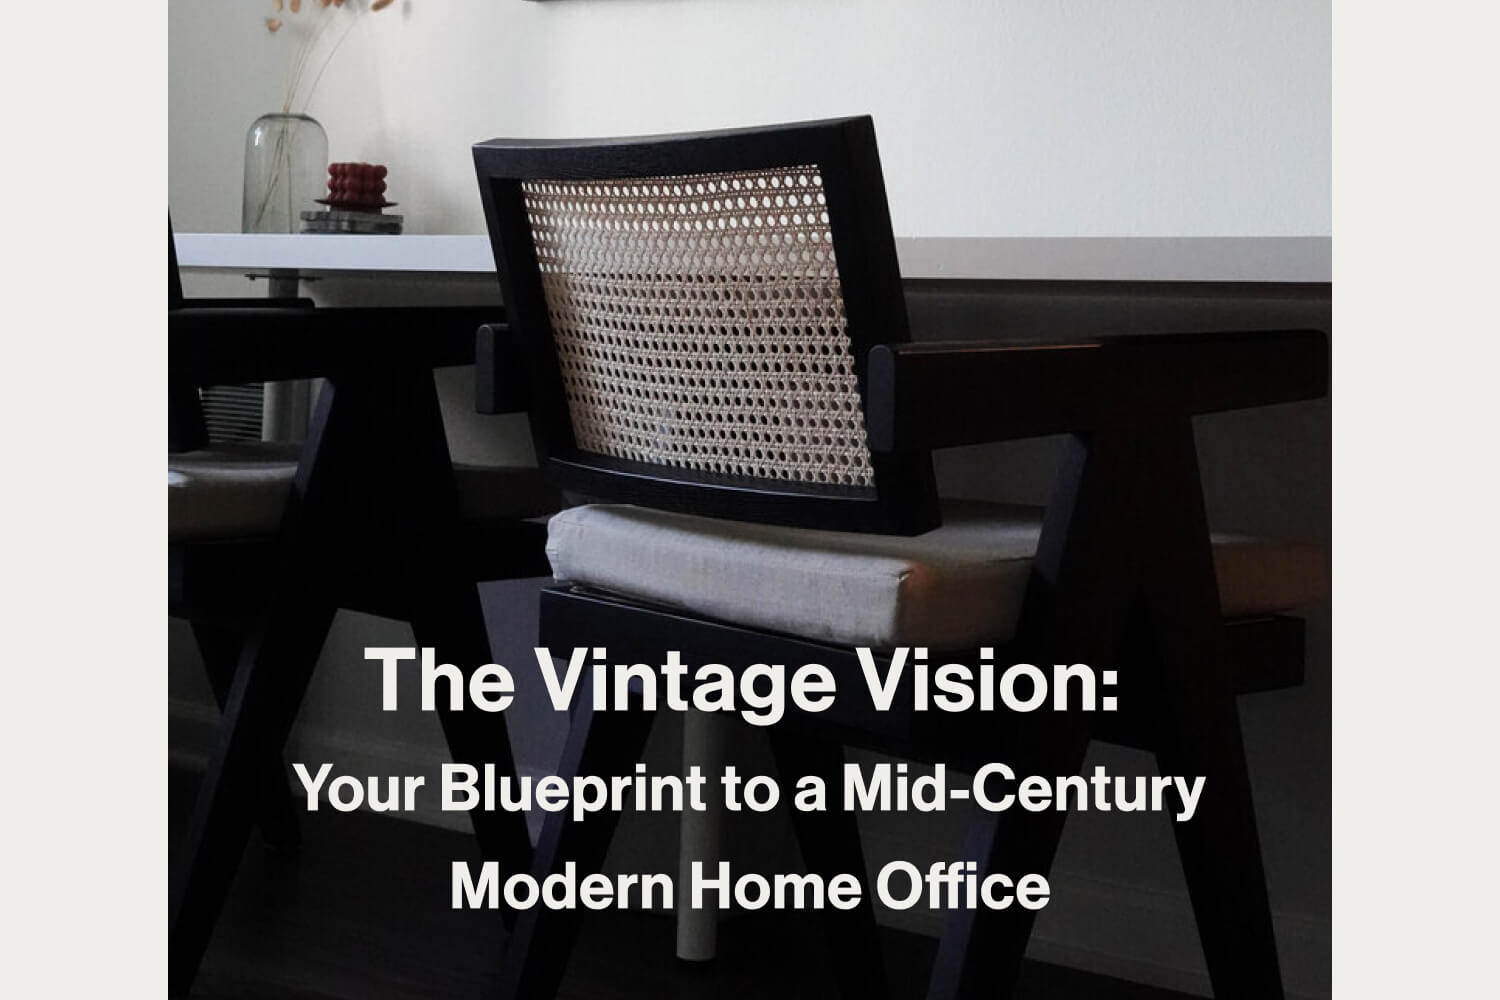 The Vintage Vision: Your Blueprint to a Mid-Century Modern Home Office